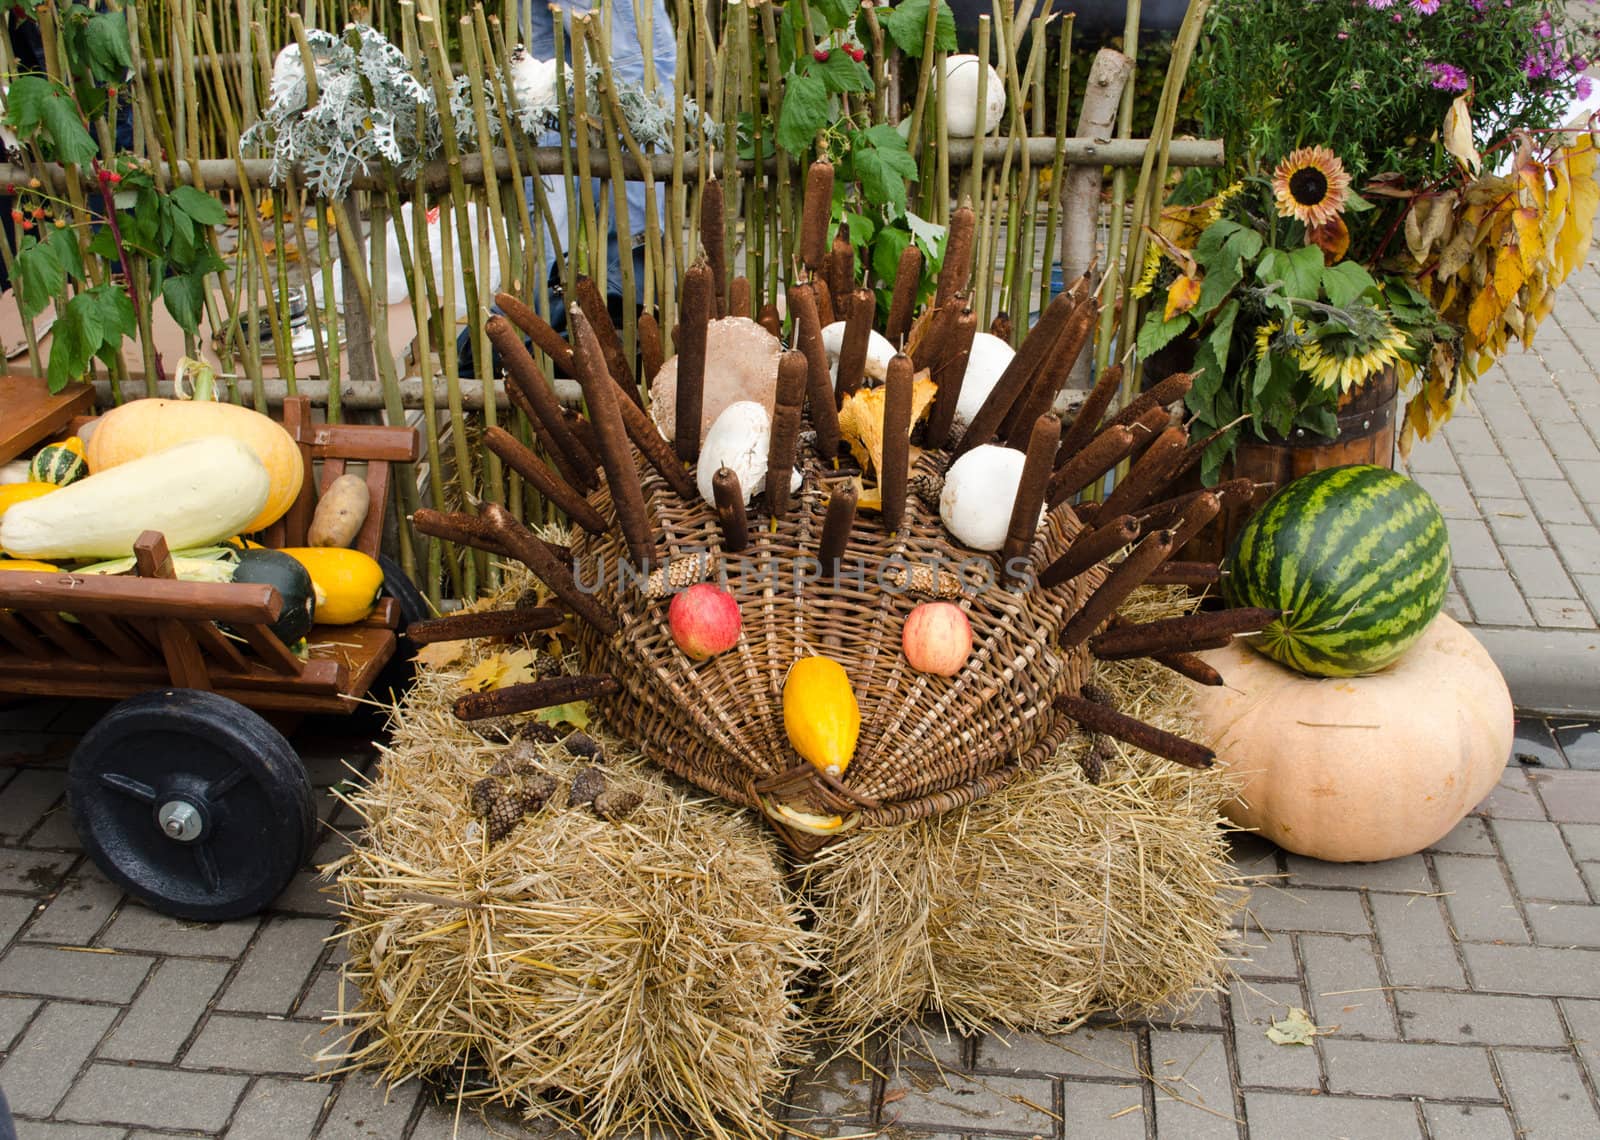 handmade hedgehog made from cat's-tails apple wicker basket courgette zucchini. autumn goodie decoration in outdoor fair market.